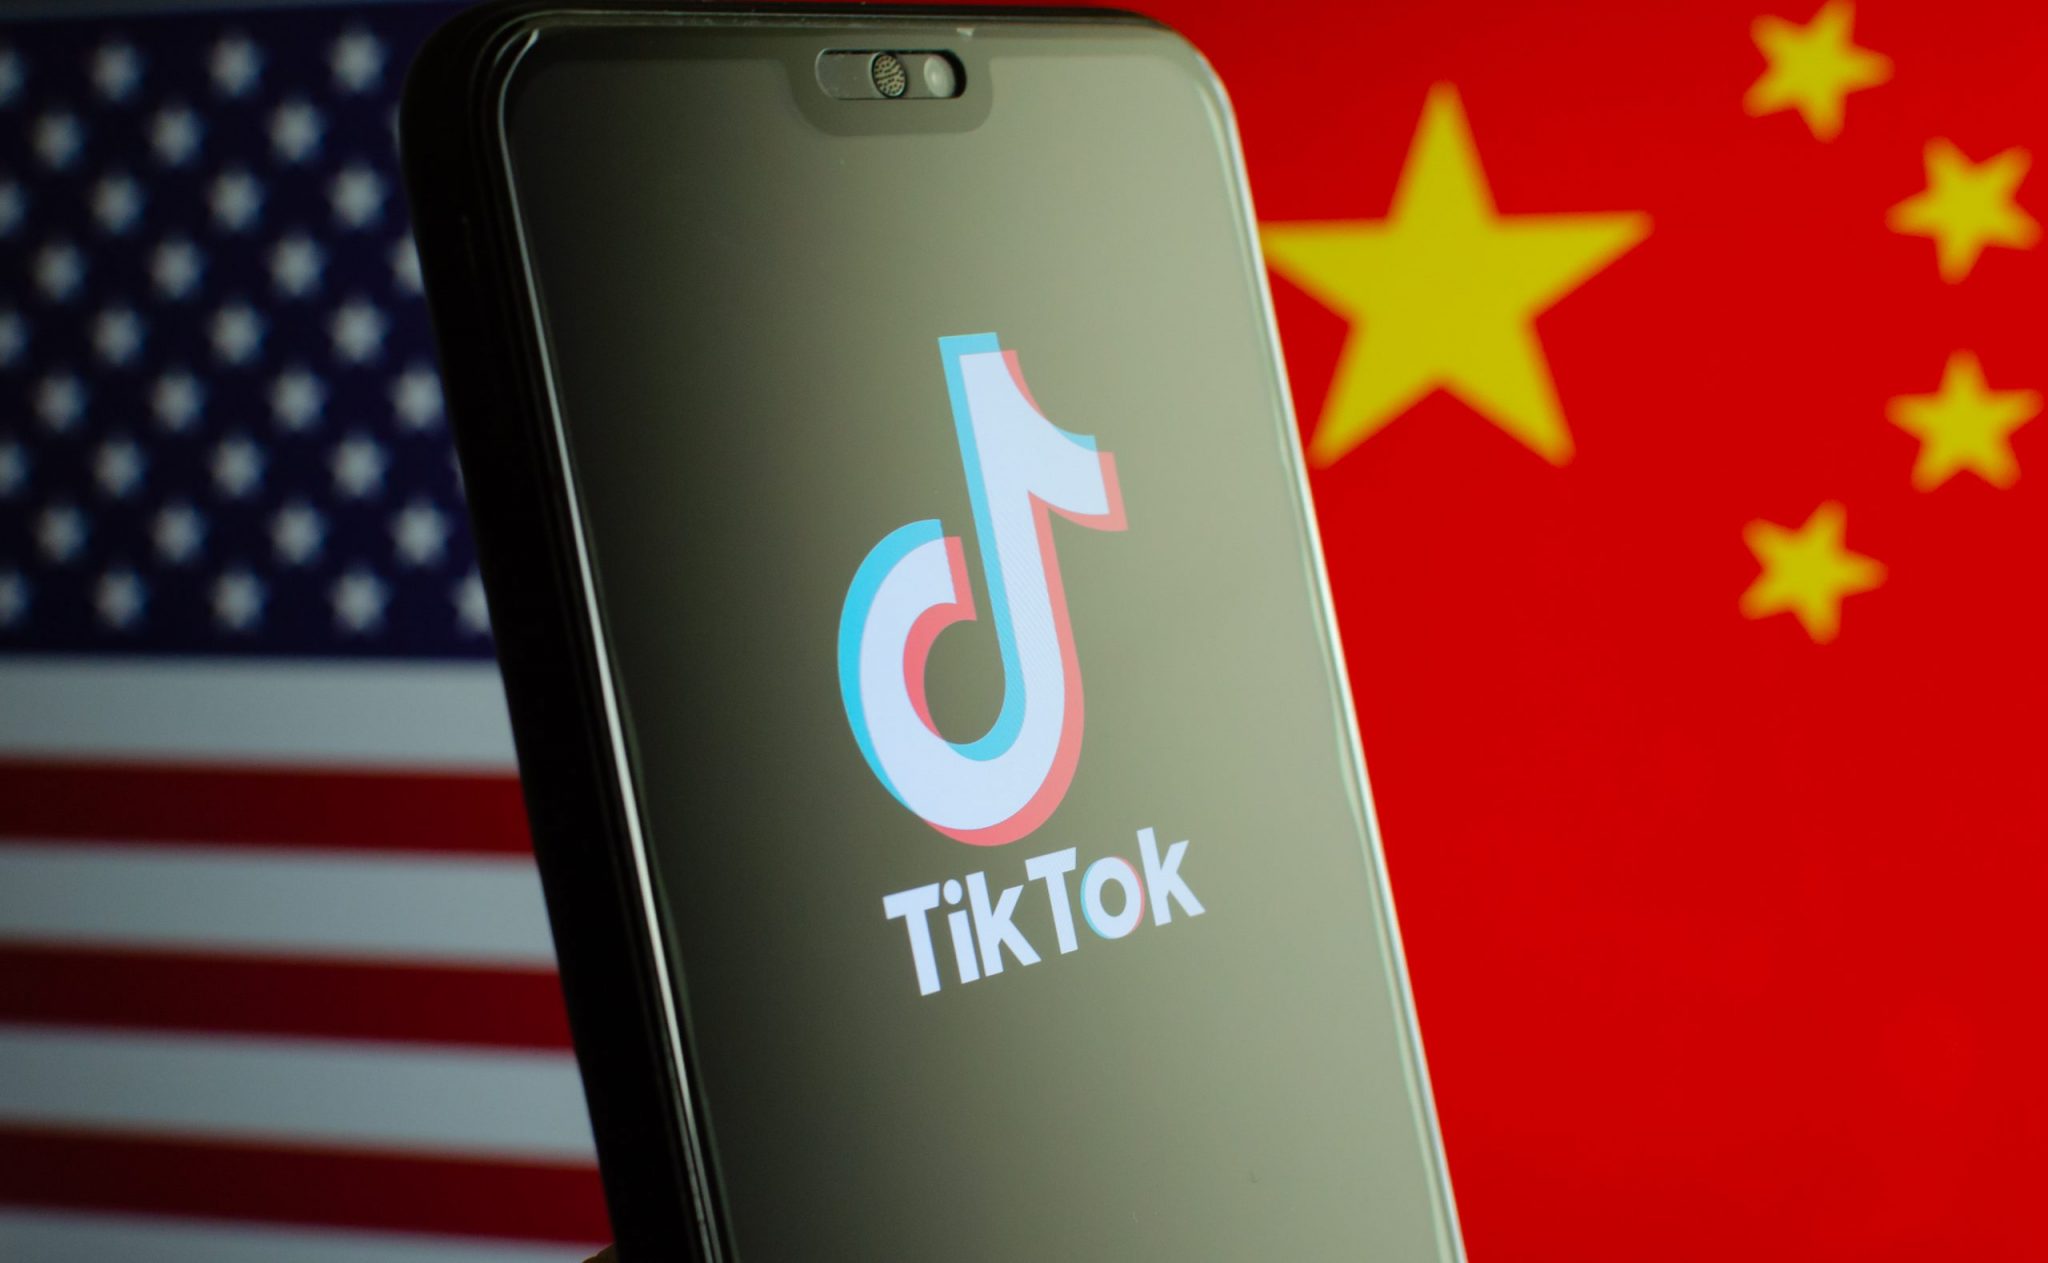 TikTok app logo on a smartphone screen and flags of China and United States on the blurred background.